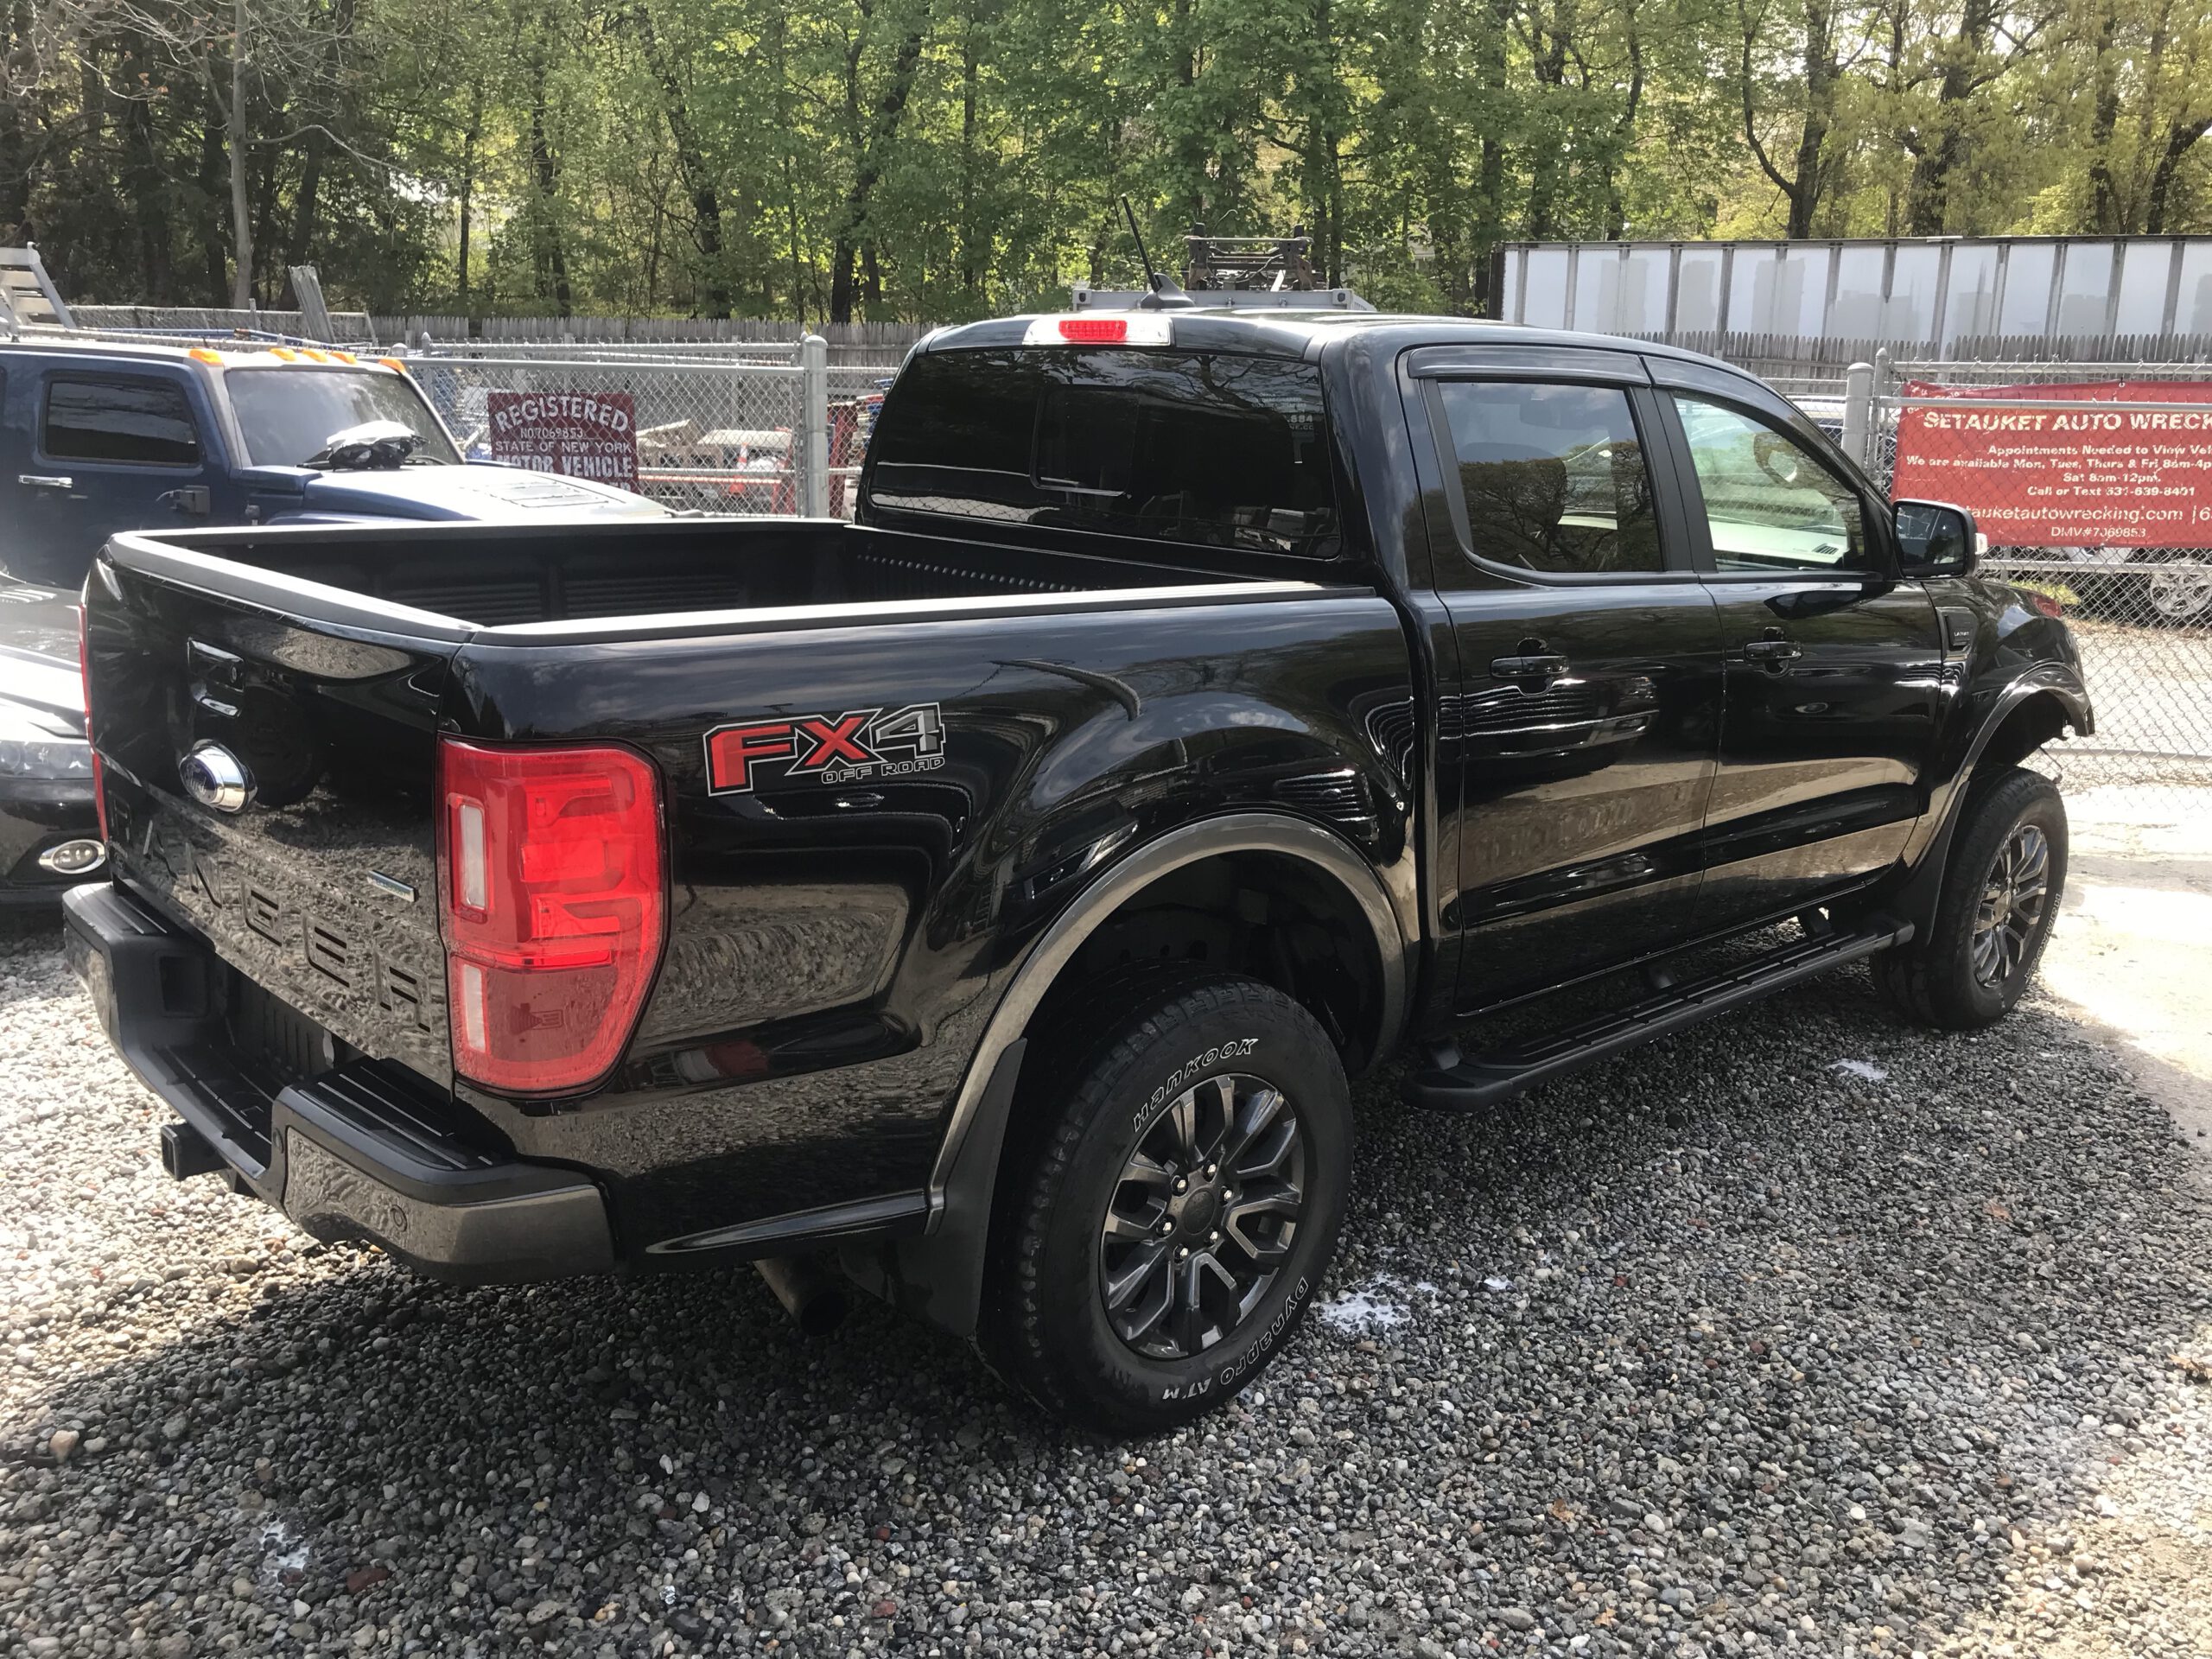 2019 Ford Ranger Lariat 4dr, 4×4, loaded, leather,  53K, front damage.   RUNS AND DRIVES. Good airbags. $15,999. full